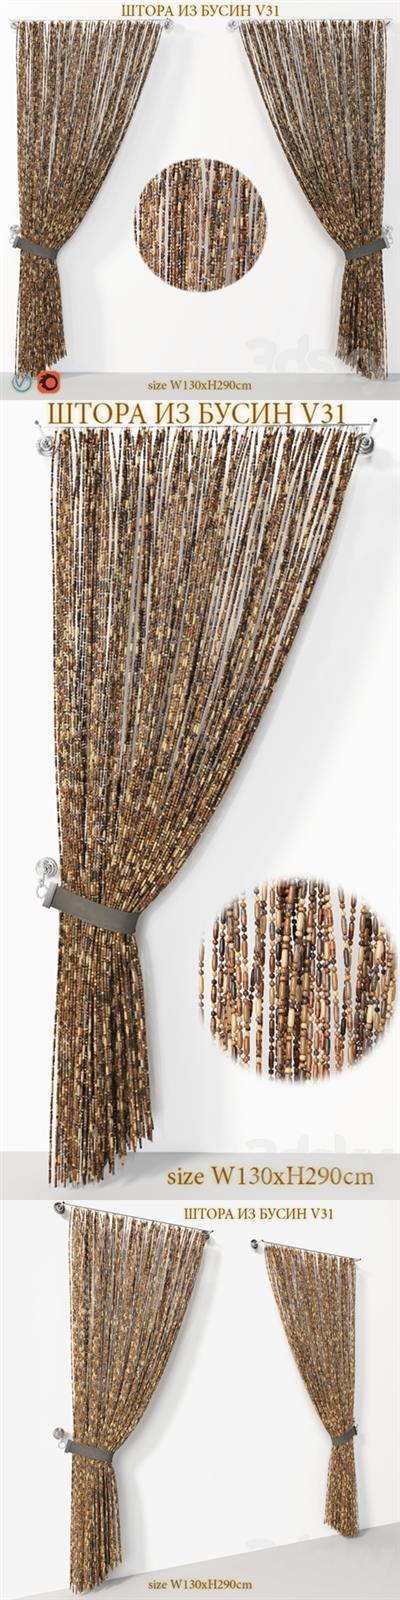 Curtains made of wooden beads V31